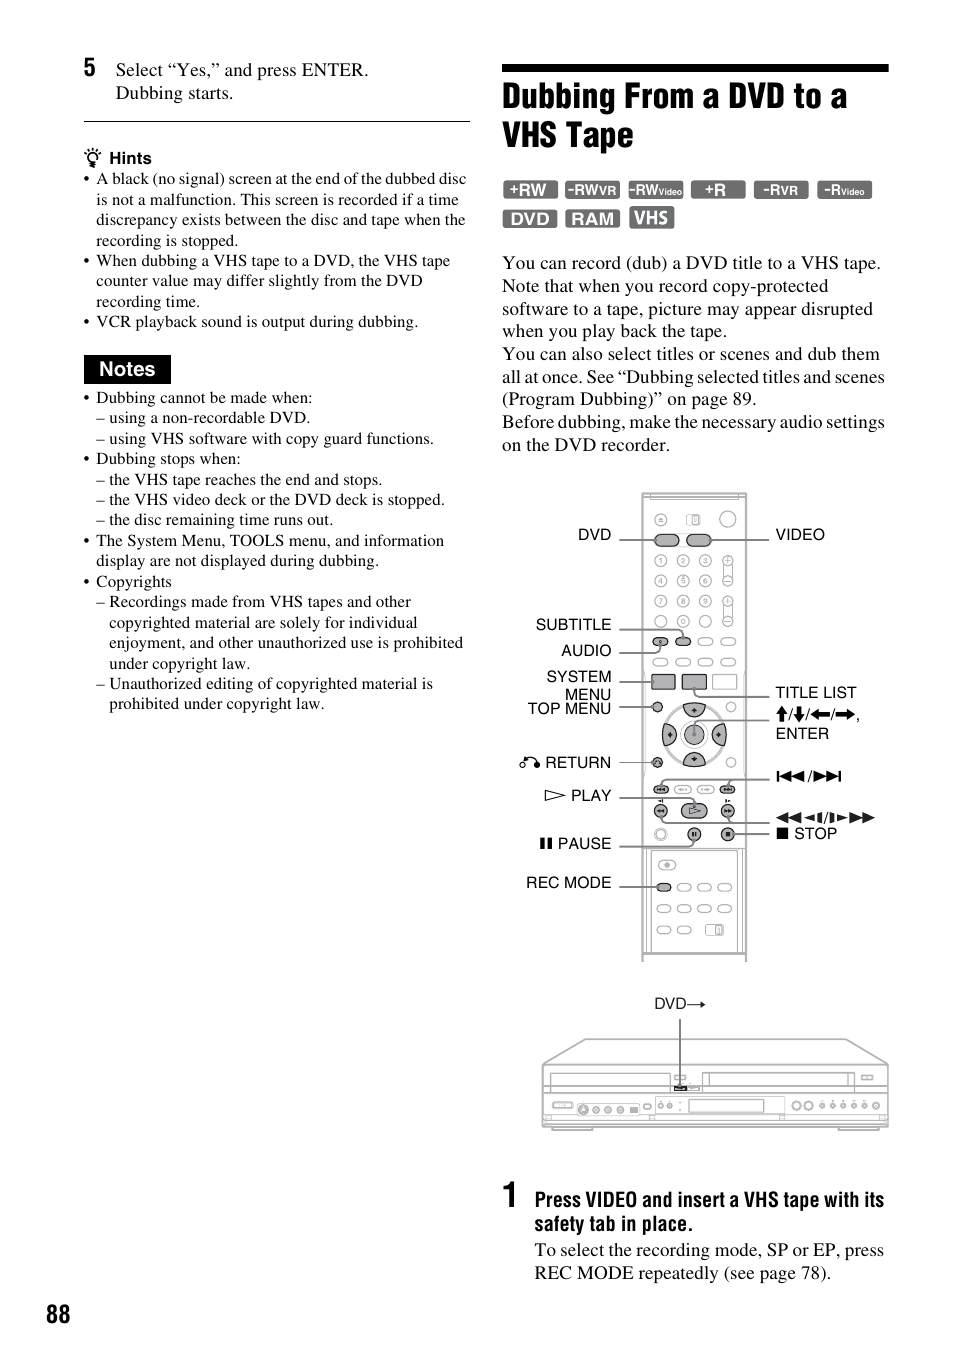 Dubbing from a dvd to a vhs tape | Sony RDR-VX521 User Manual | Page 88 / 132